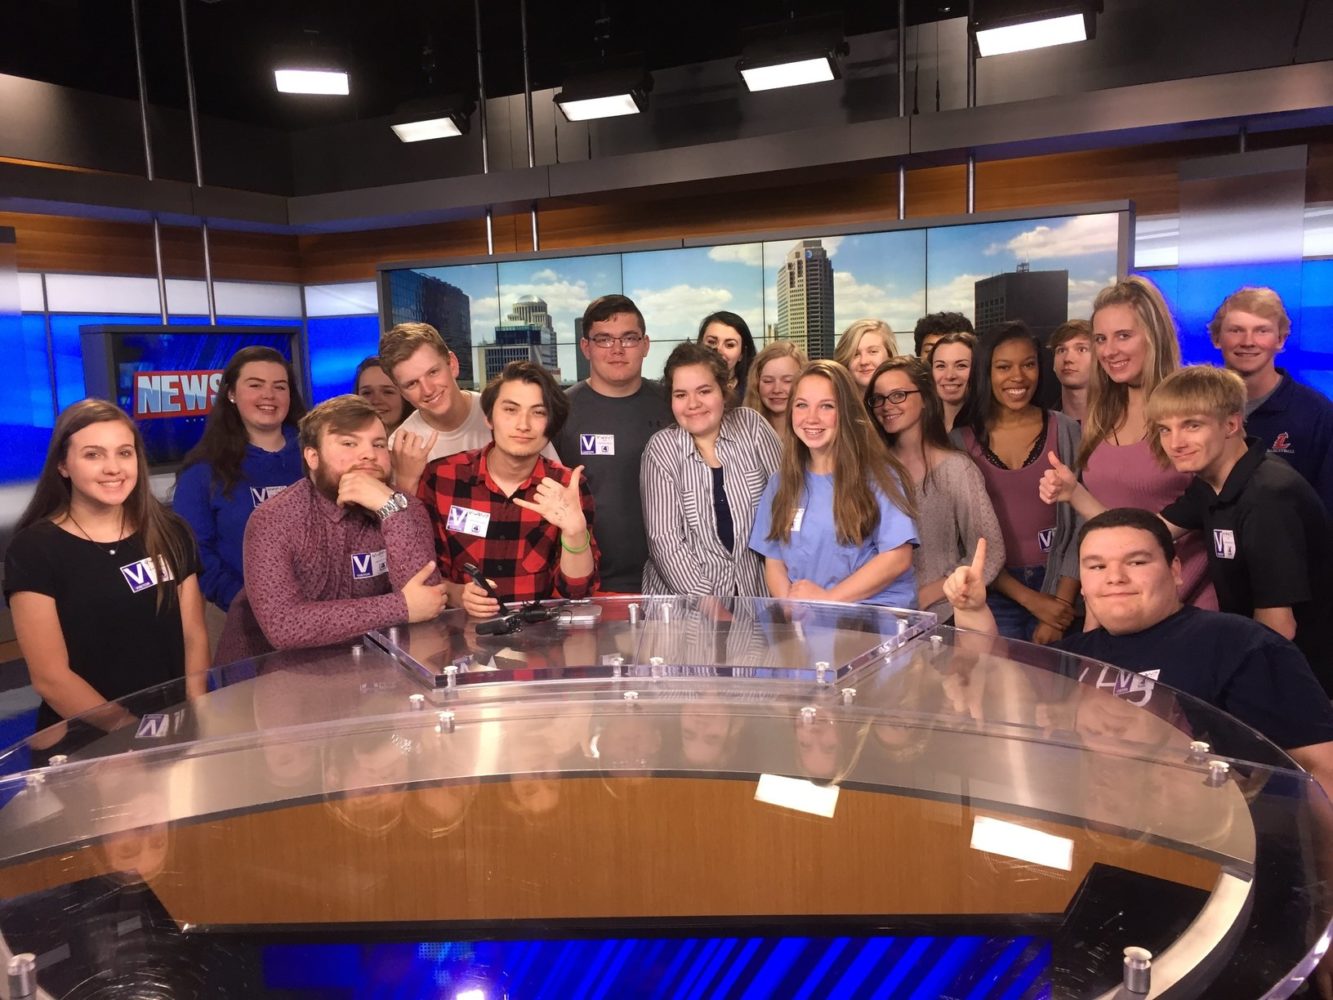 The+journalism+class+took+a+field+trip+to+KMOV-Channel+4+where+they+learned+about+how+a+news+station+works+and+get+helpful+advice+from+professional+journalists++themselves.